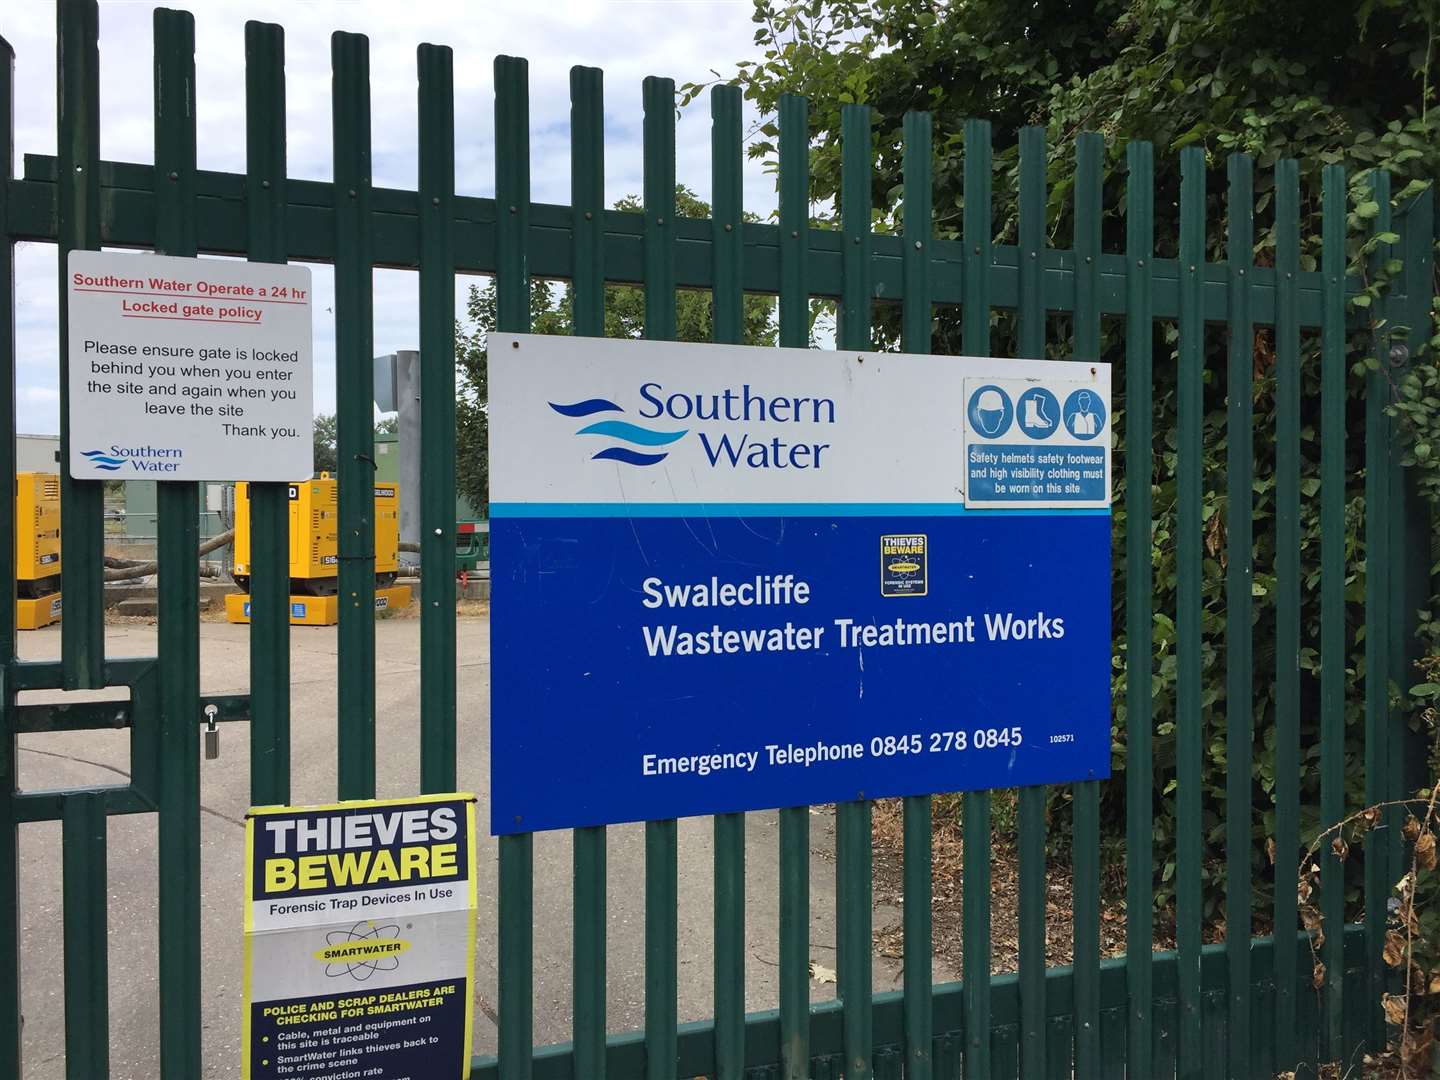 Southern Water's treatment works in Swalecliffe